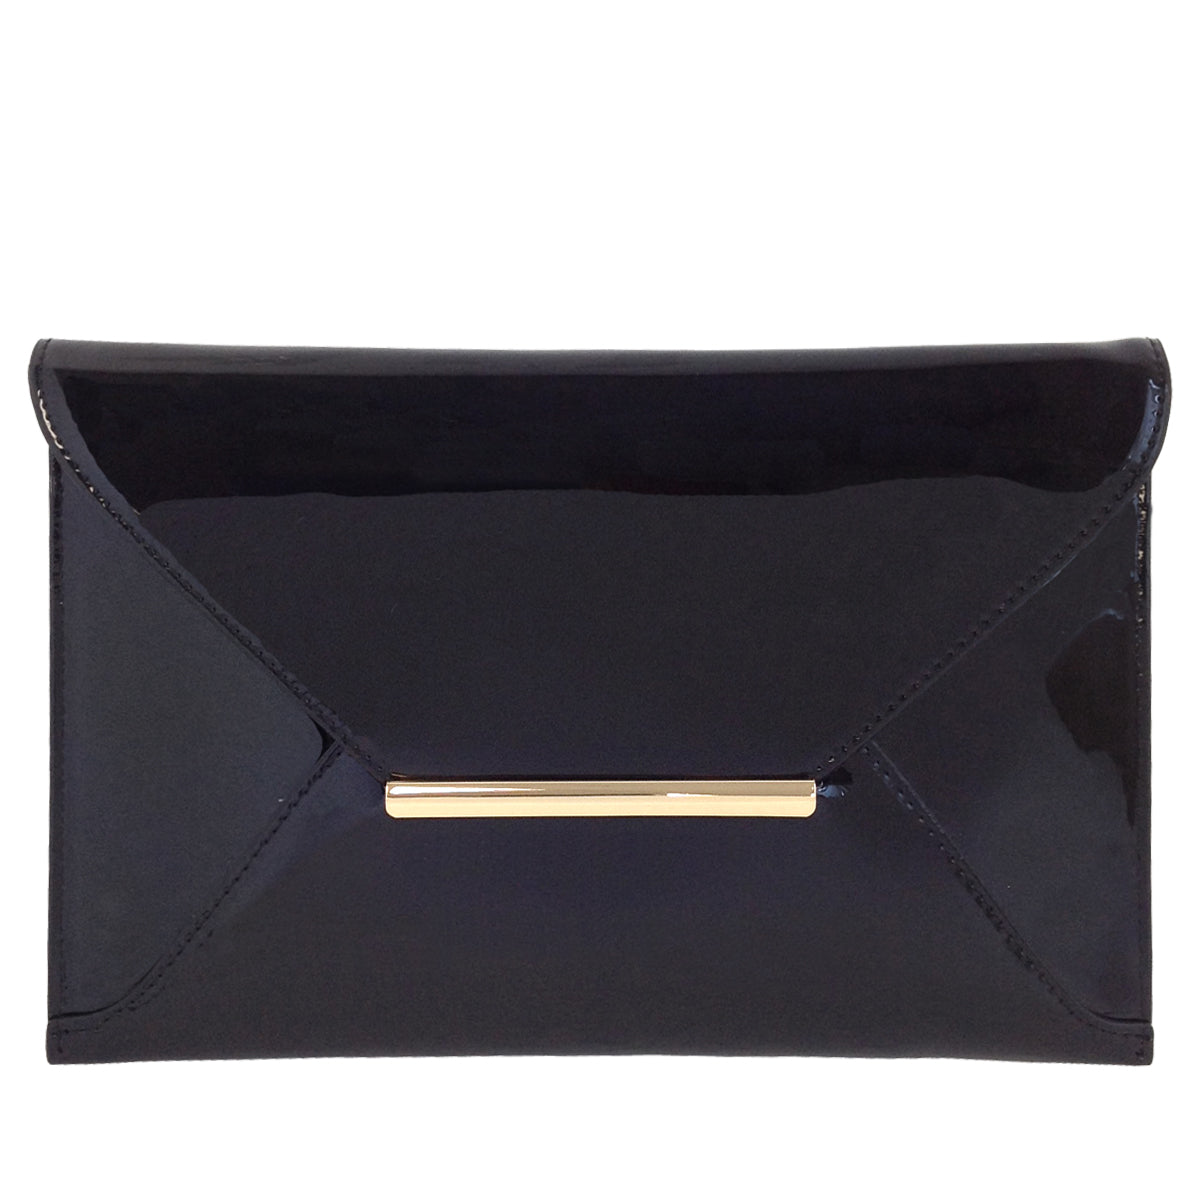 Luxury Black Envelope Bag: Gold Chain Clutch Quality Glossy